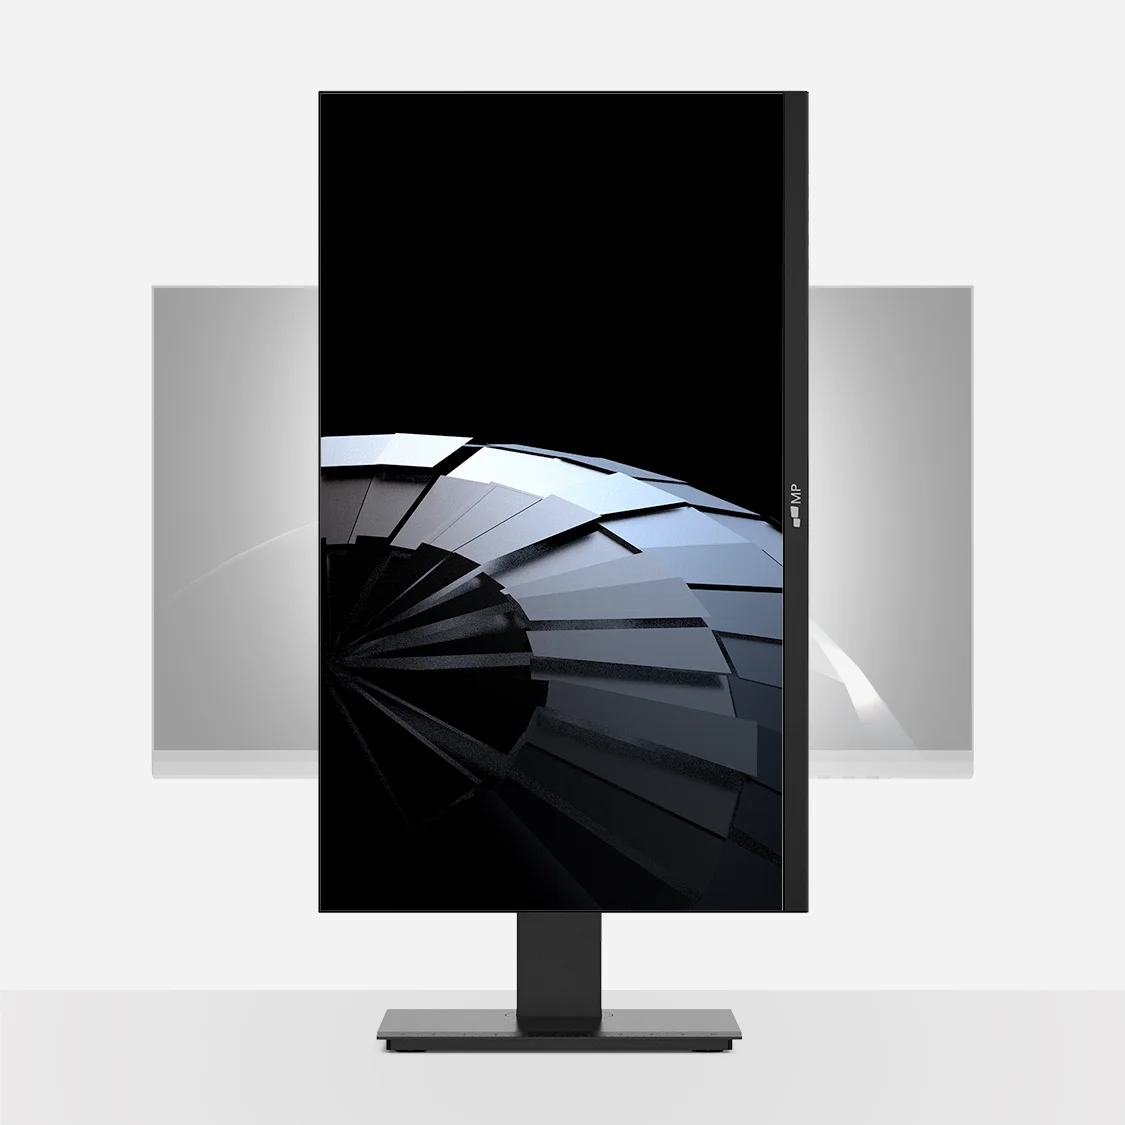 MP 24 inch vertical computer monitor